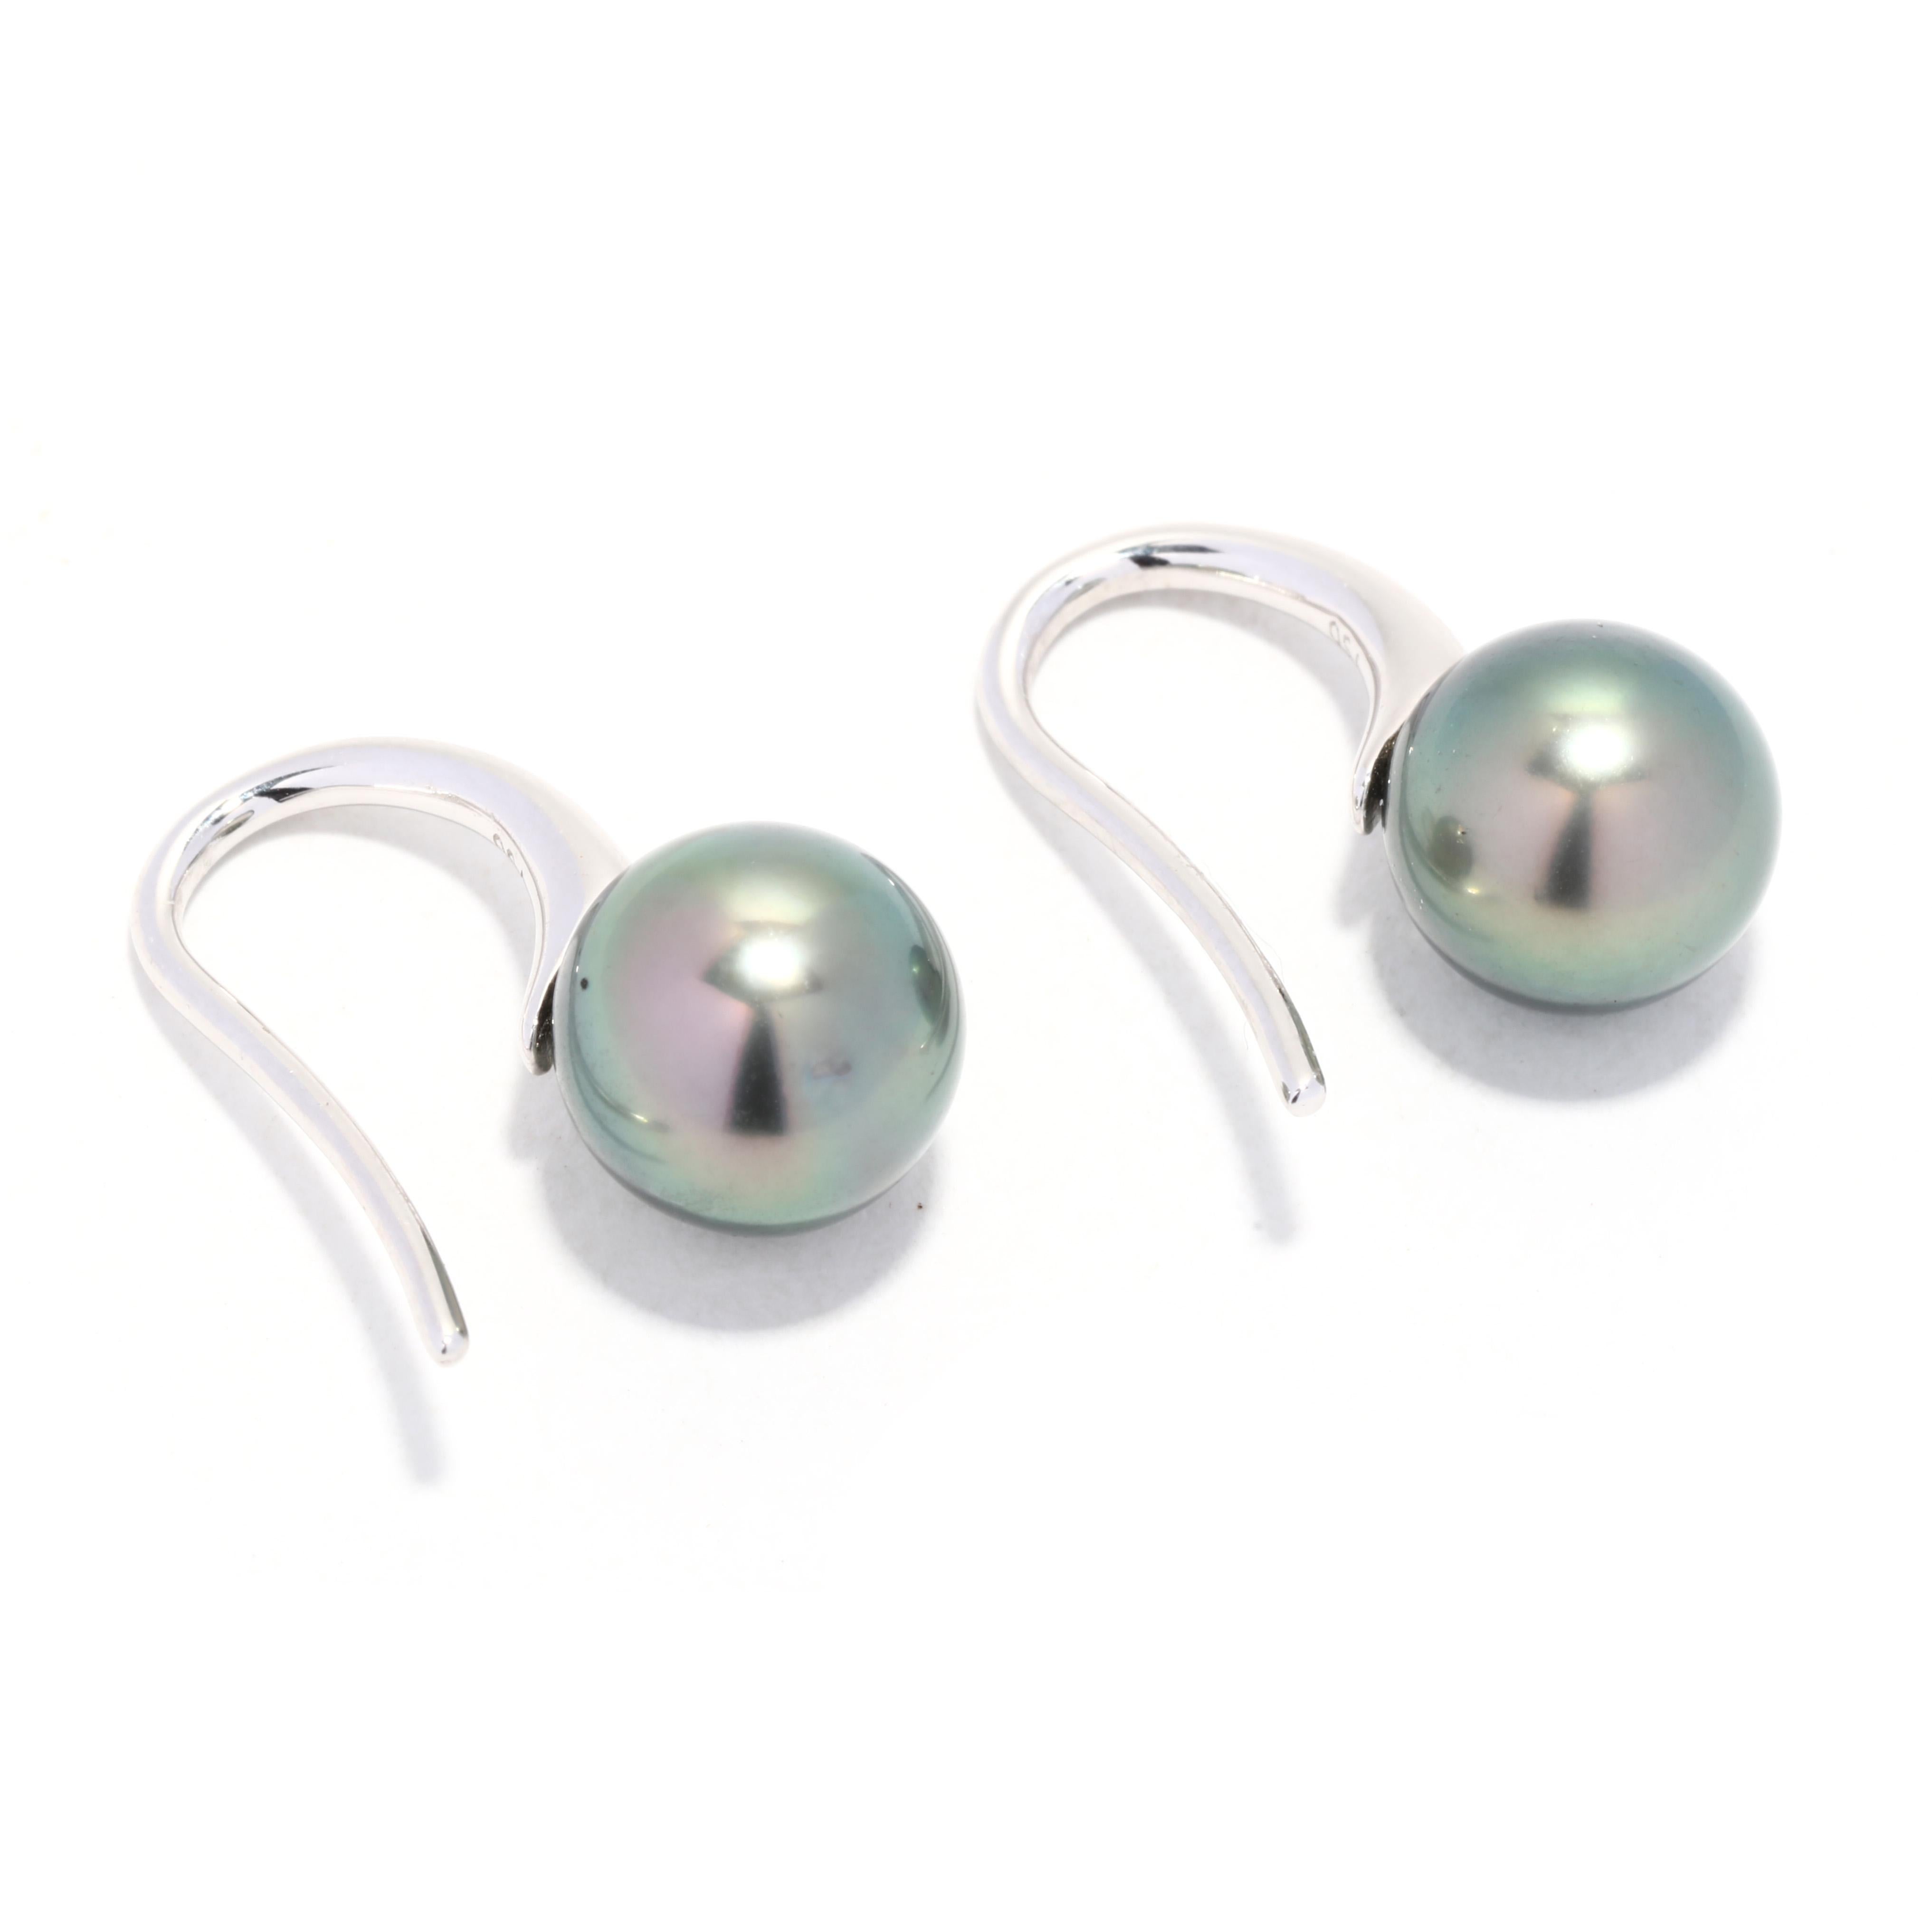 A pair of 18 karat white gold Tahitian pearl drop earrings. This simple pearl drops feature 9.4 mm black Tahitian pearls, dropped from a thin tapered ear wire.

Stones:
- Tahitian pearl, 2 stones
- round bead
- 9.4 mm

Length: 5/8 in.

Width: 9.4